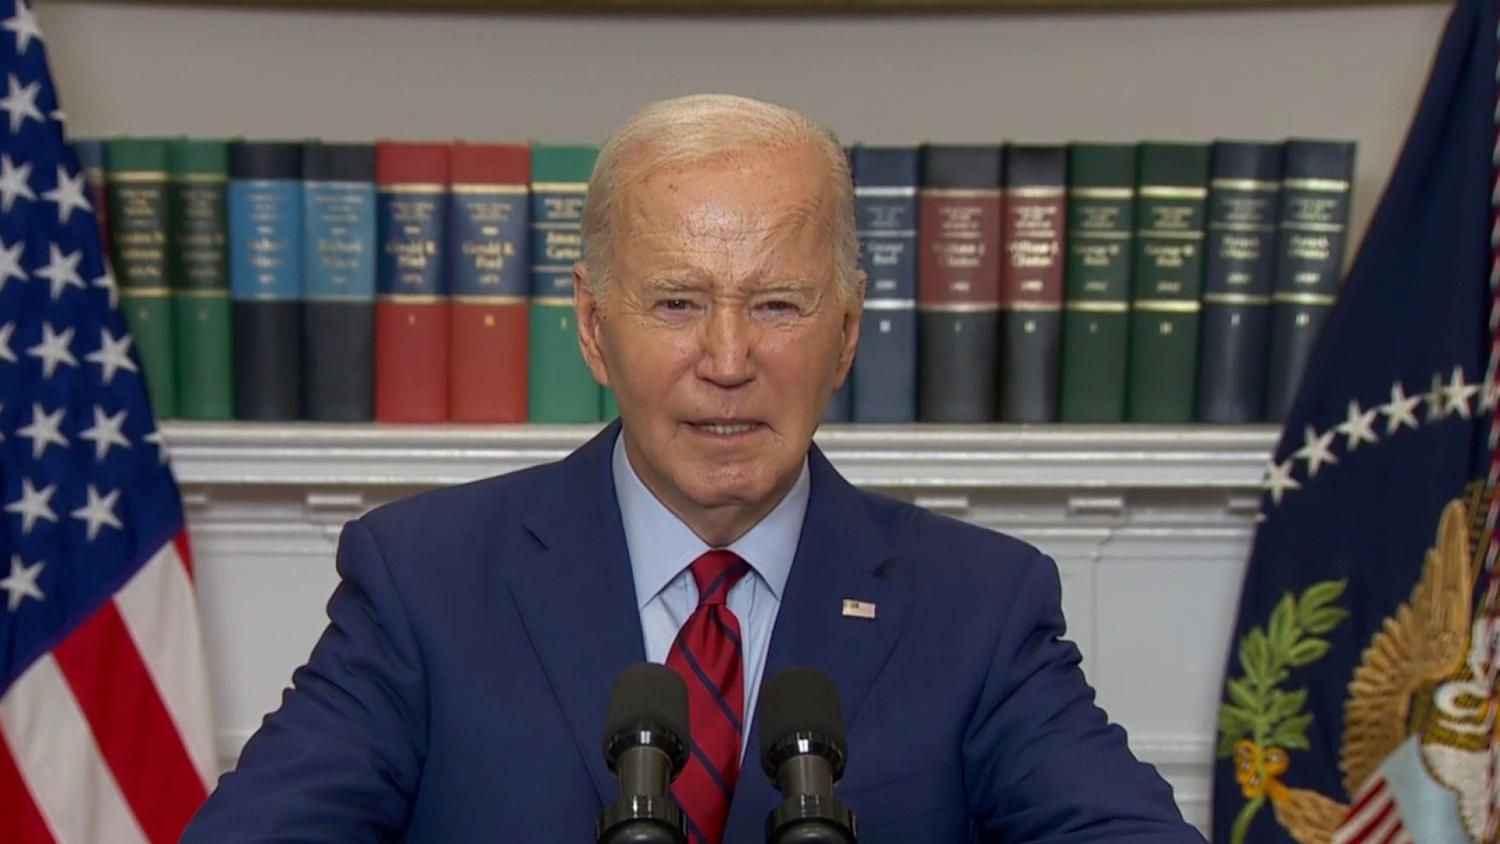 Biden addresses campus protests: 'There is no place for hate speech'